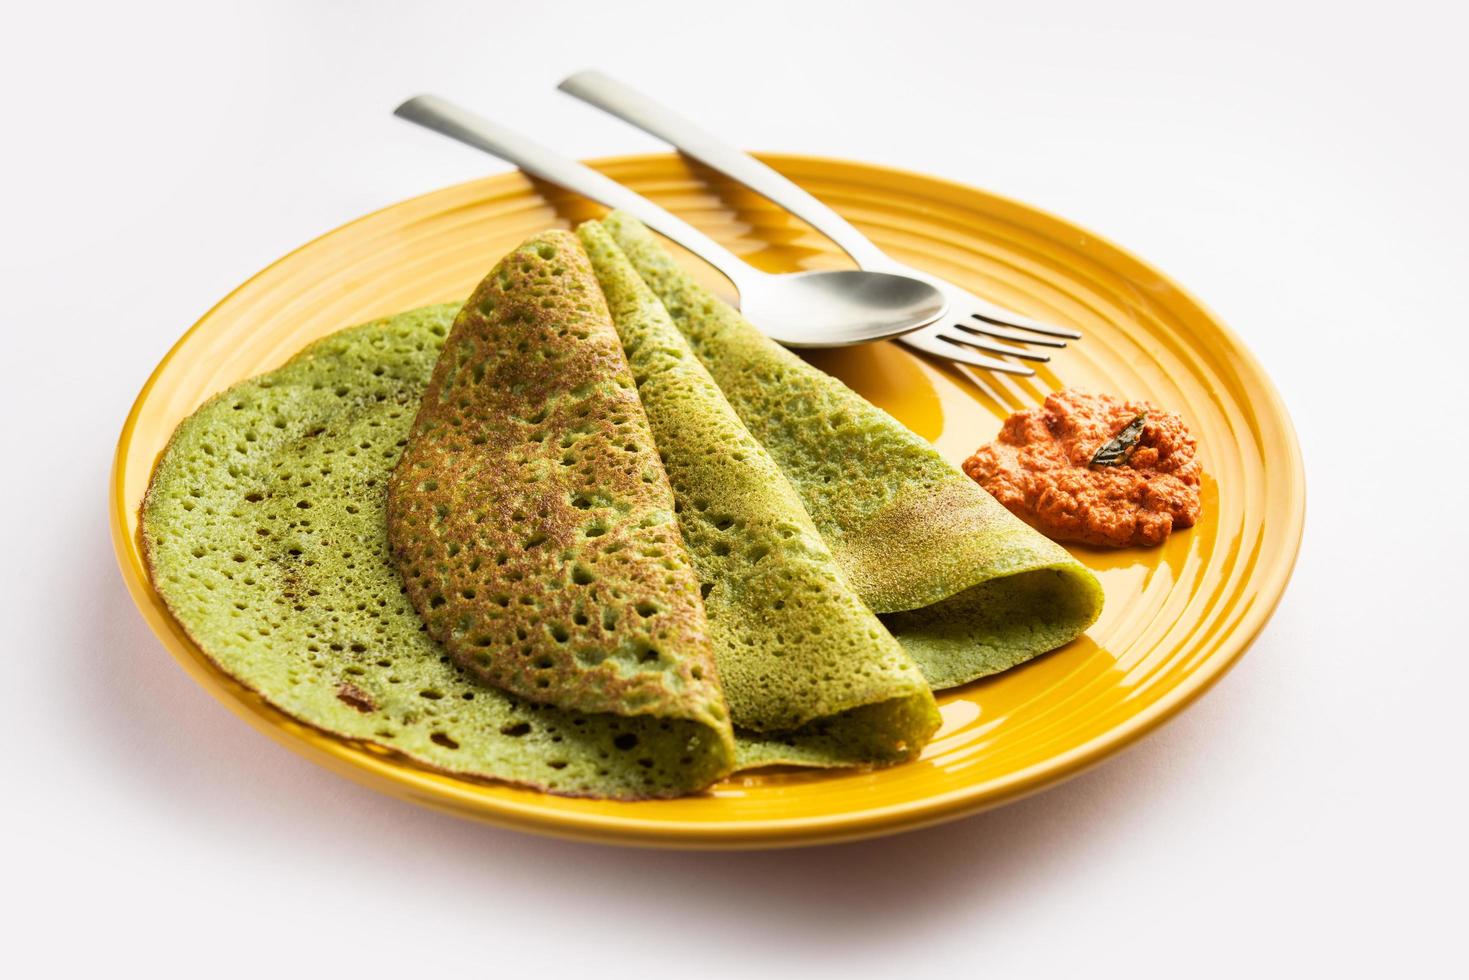 Palak dosa made using mixing spinach or keerai in batter, served with red chutney photo